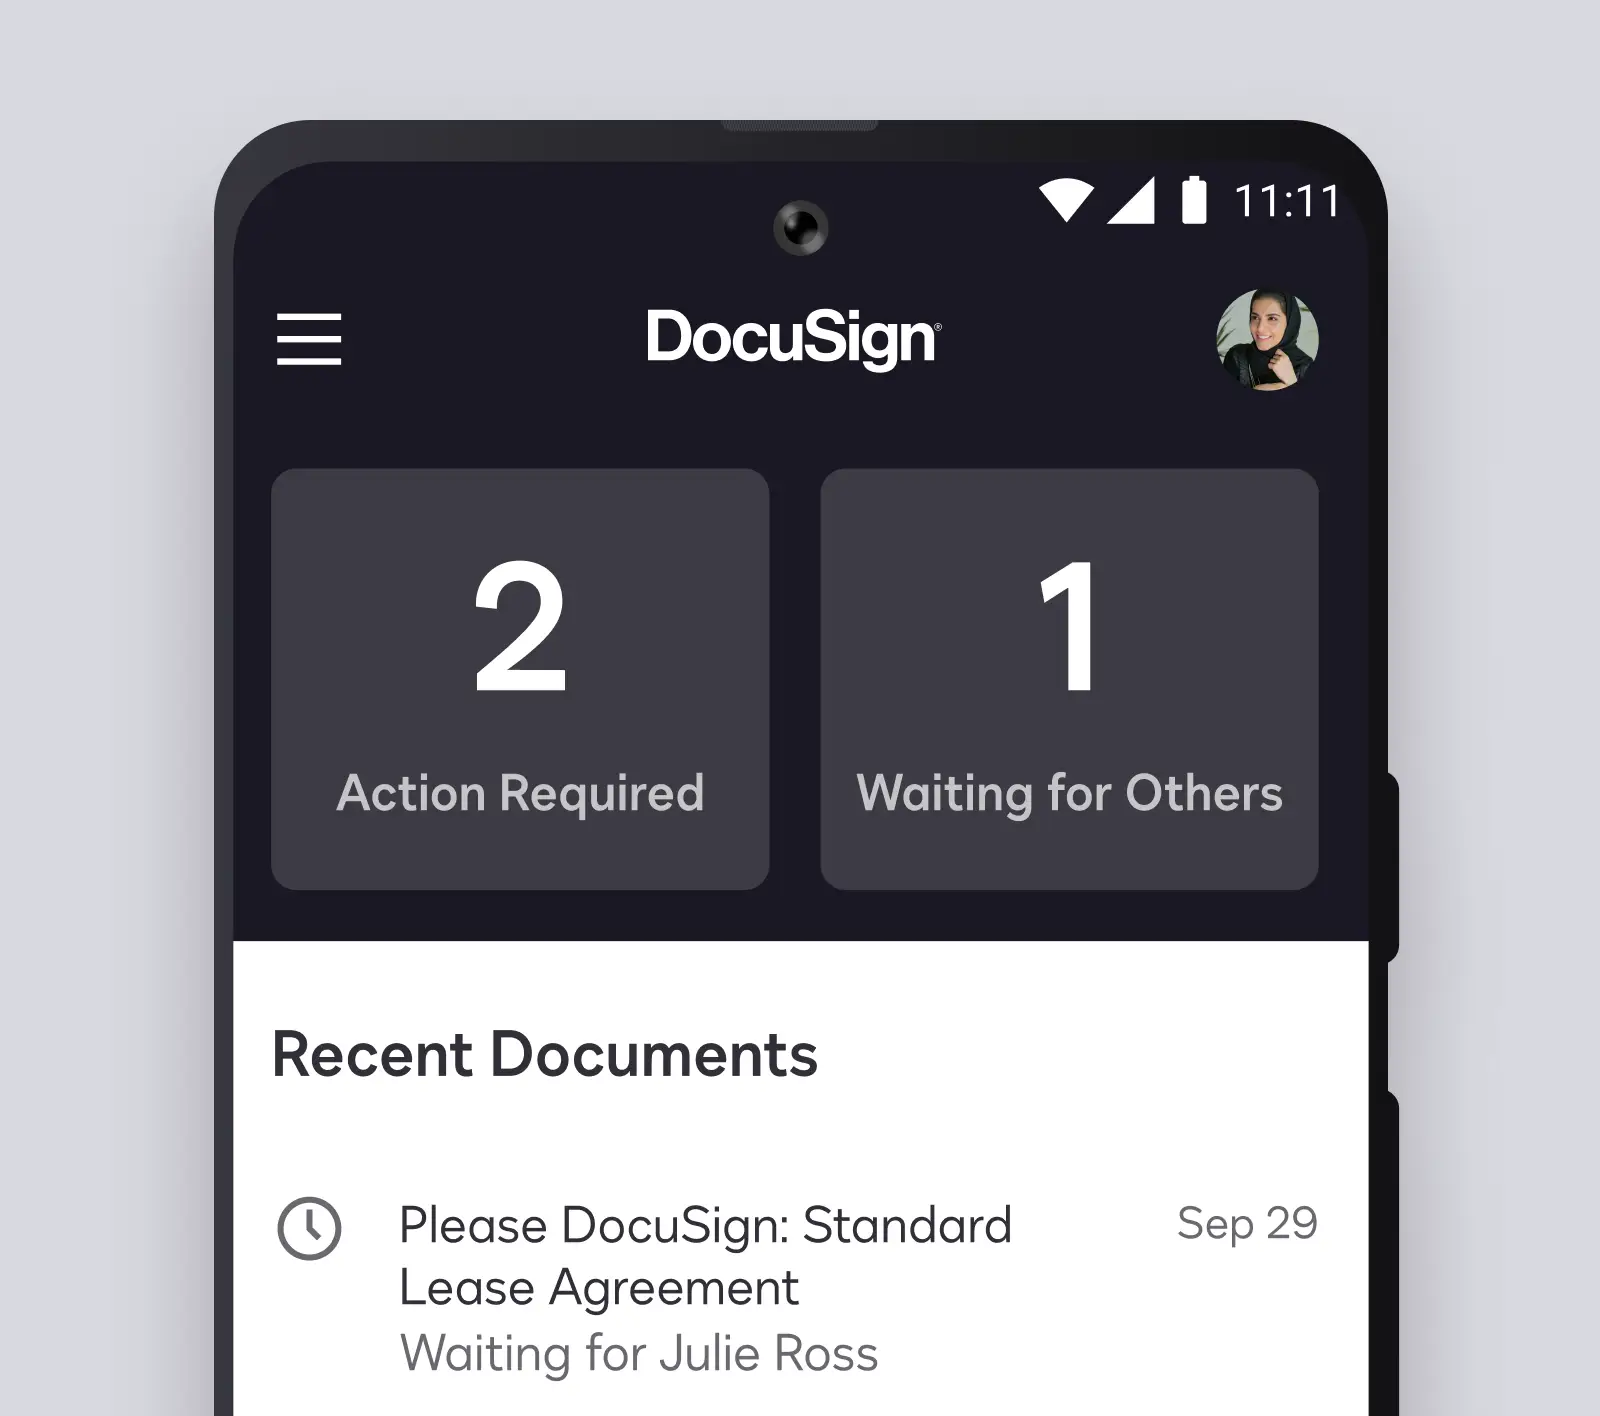 Phone screen showing DocuSign app with recent documents and required actions